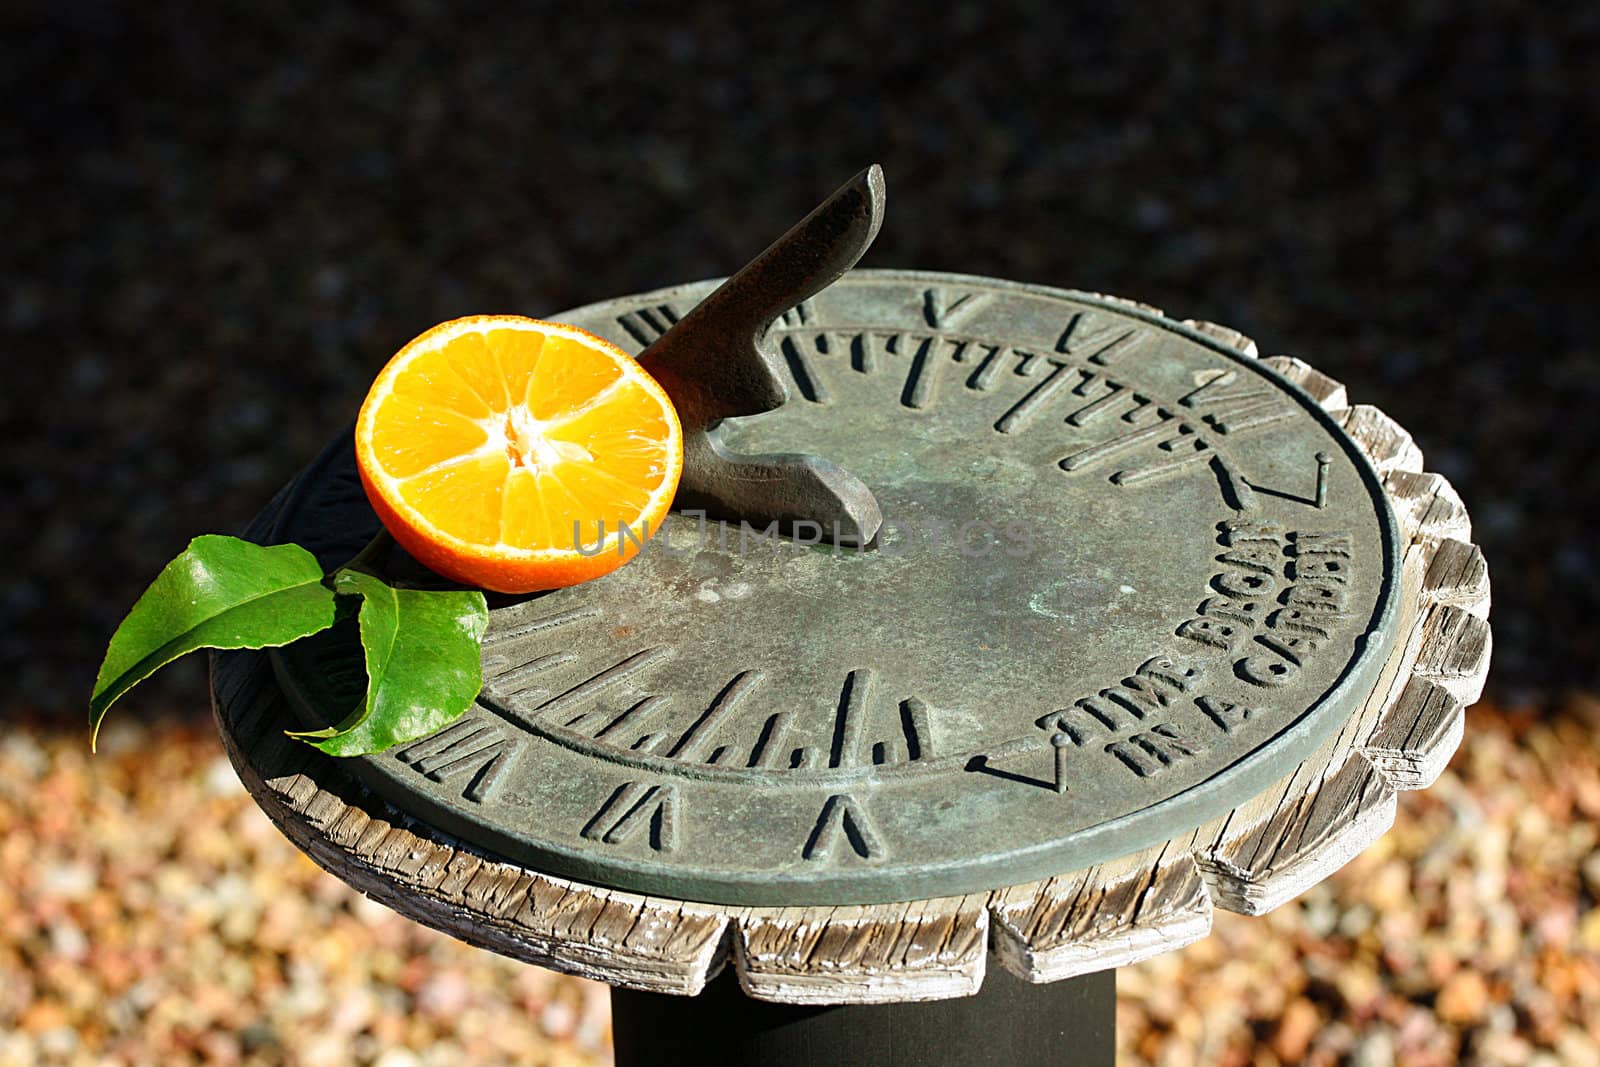 Tangerine with sundial by VIPDesignUSA